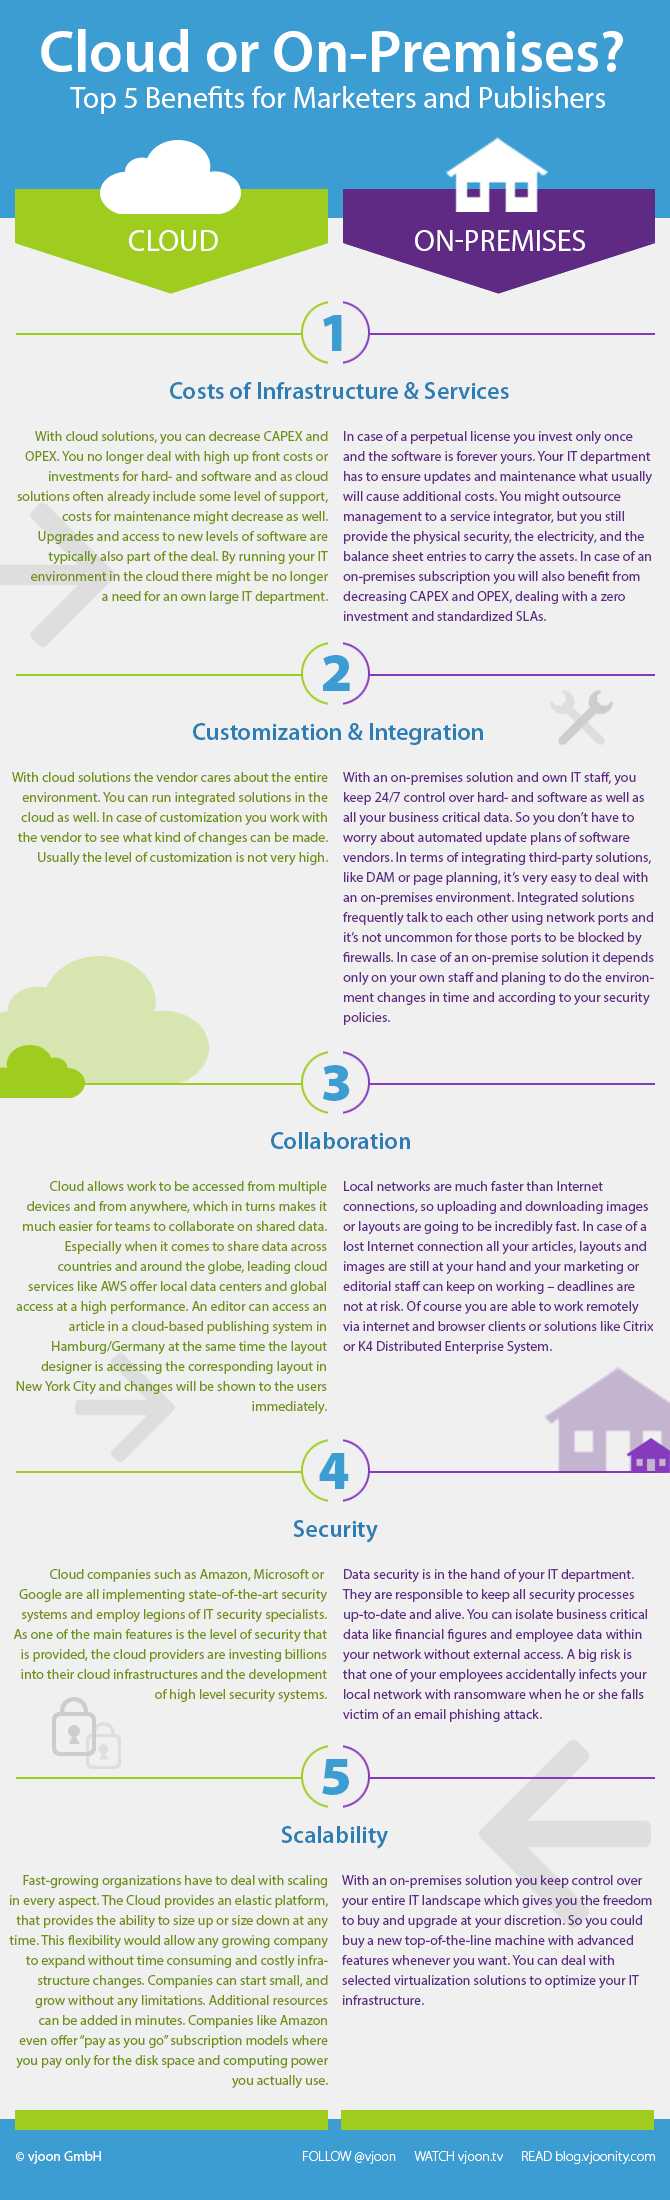 This image describes the top 5 benefits of cloud or on-premises software solutions.